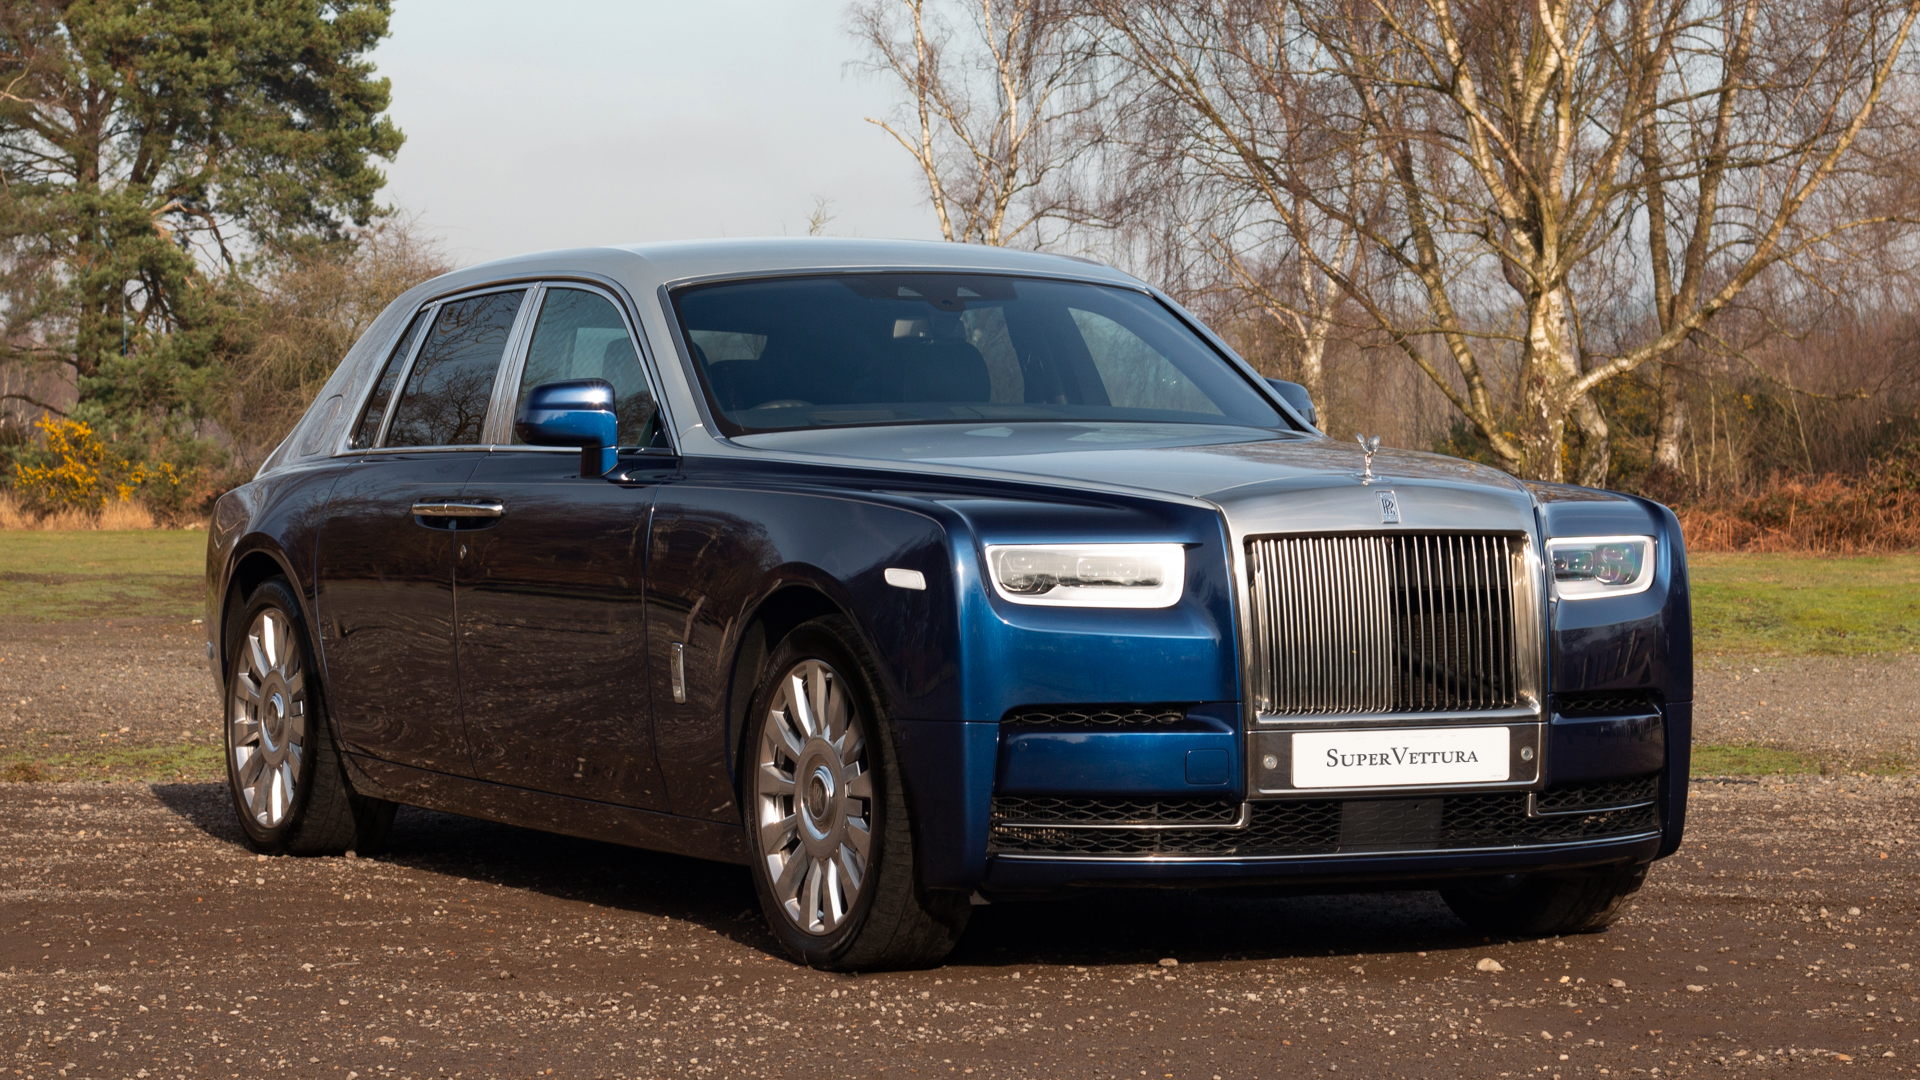 This RollsRoyce Phantom was inspired by a rocking chair  Top Gear